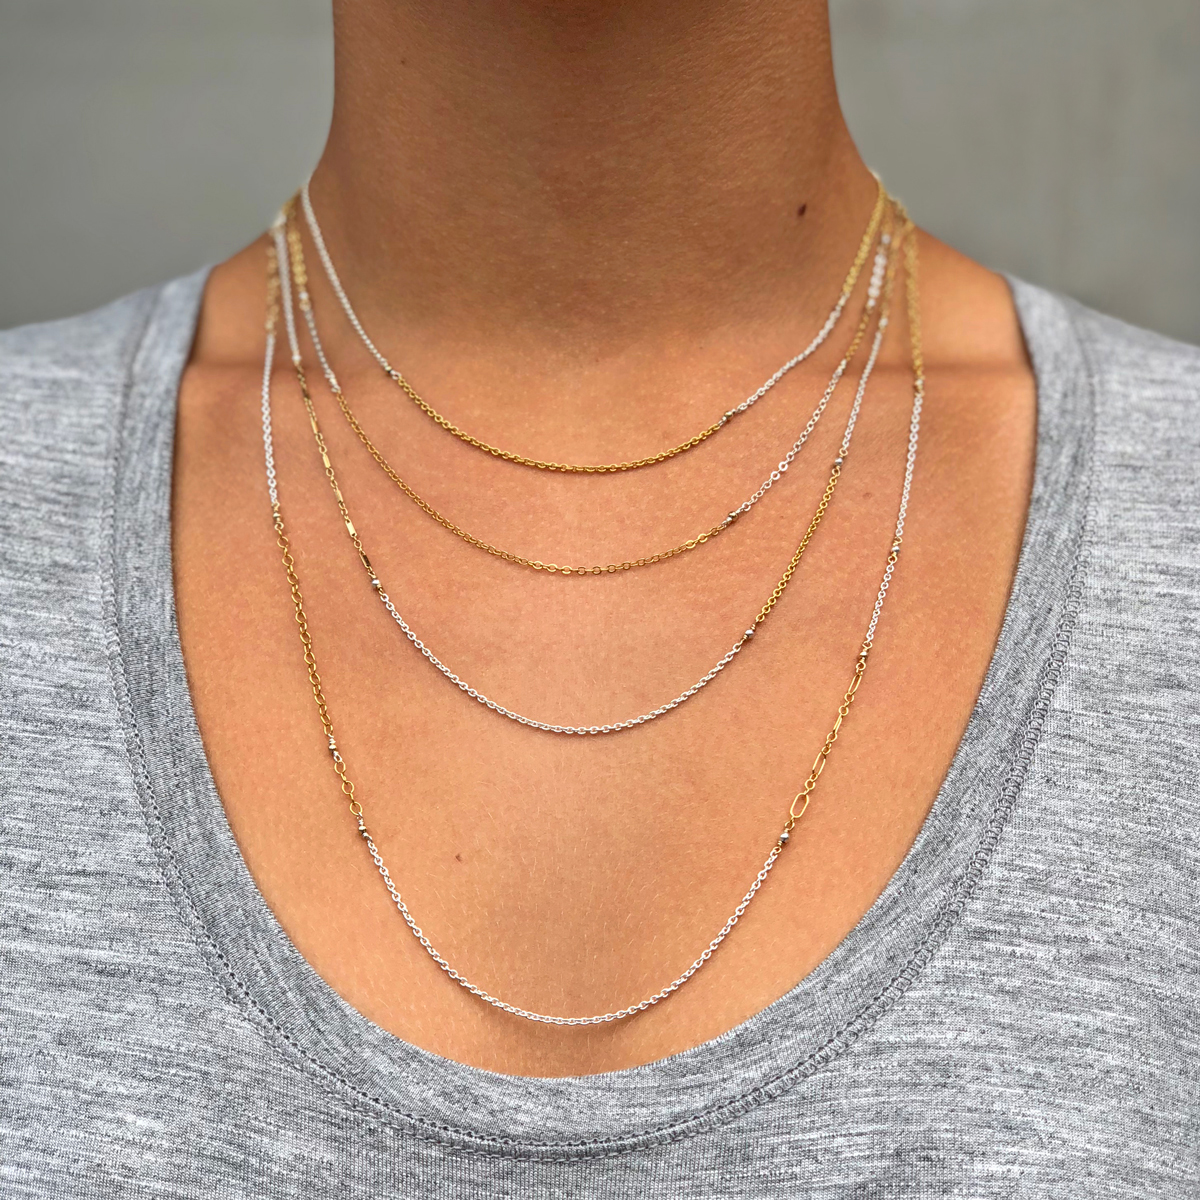 Mix and Match: Can You Mix Gold and Silver Jewelry?